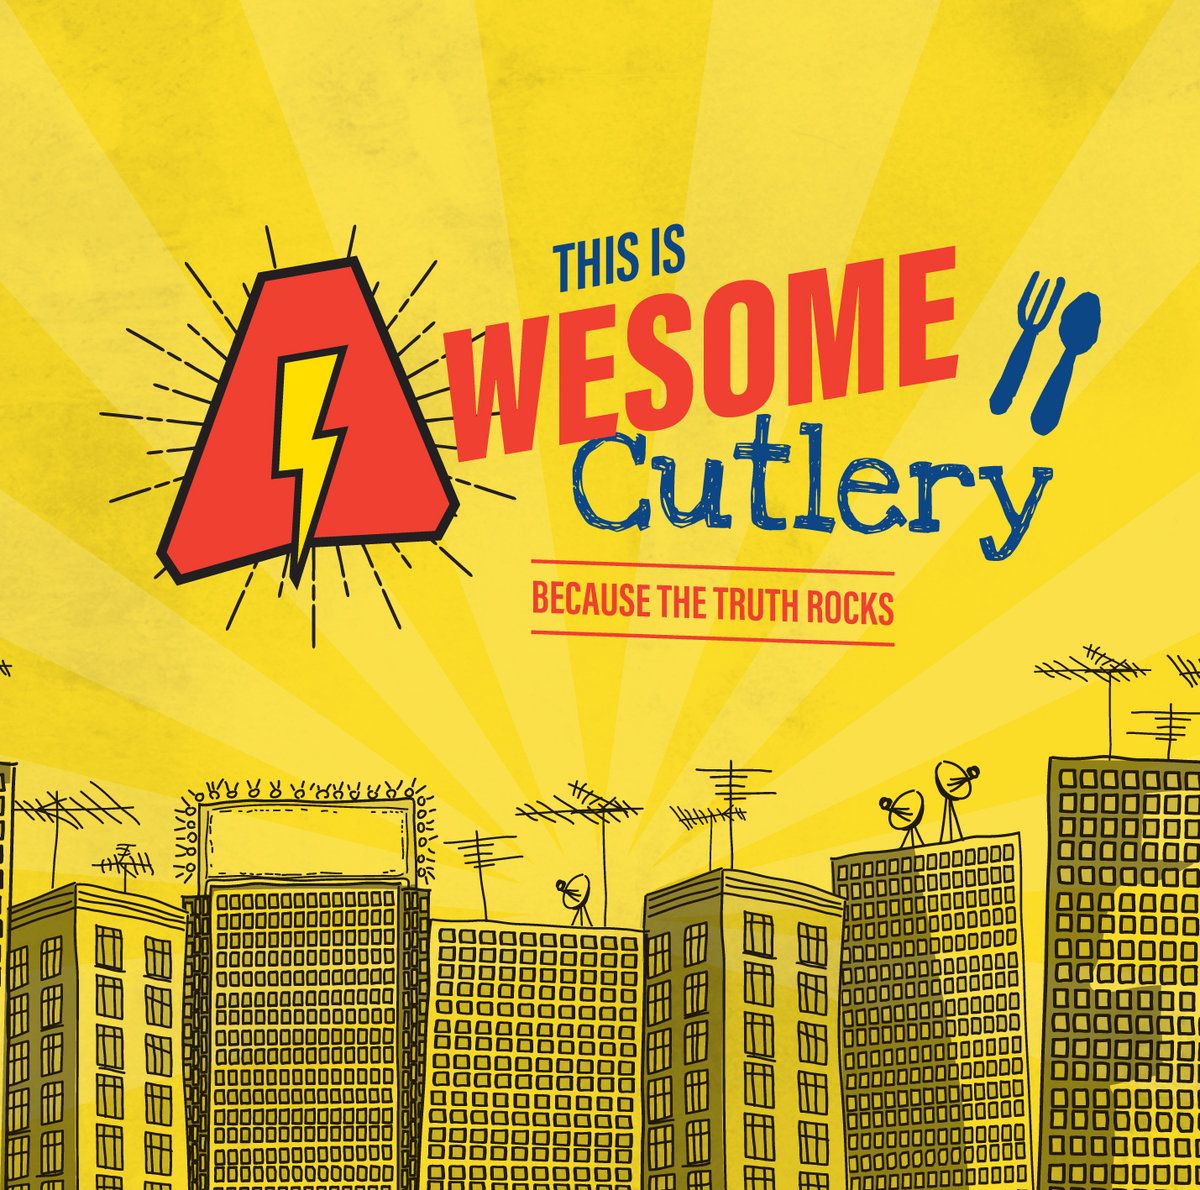 ‘This Is Awesome Cutlery’ Album – A Review